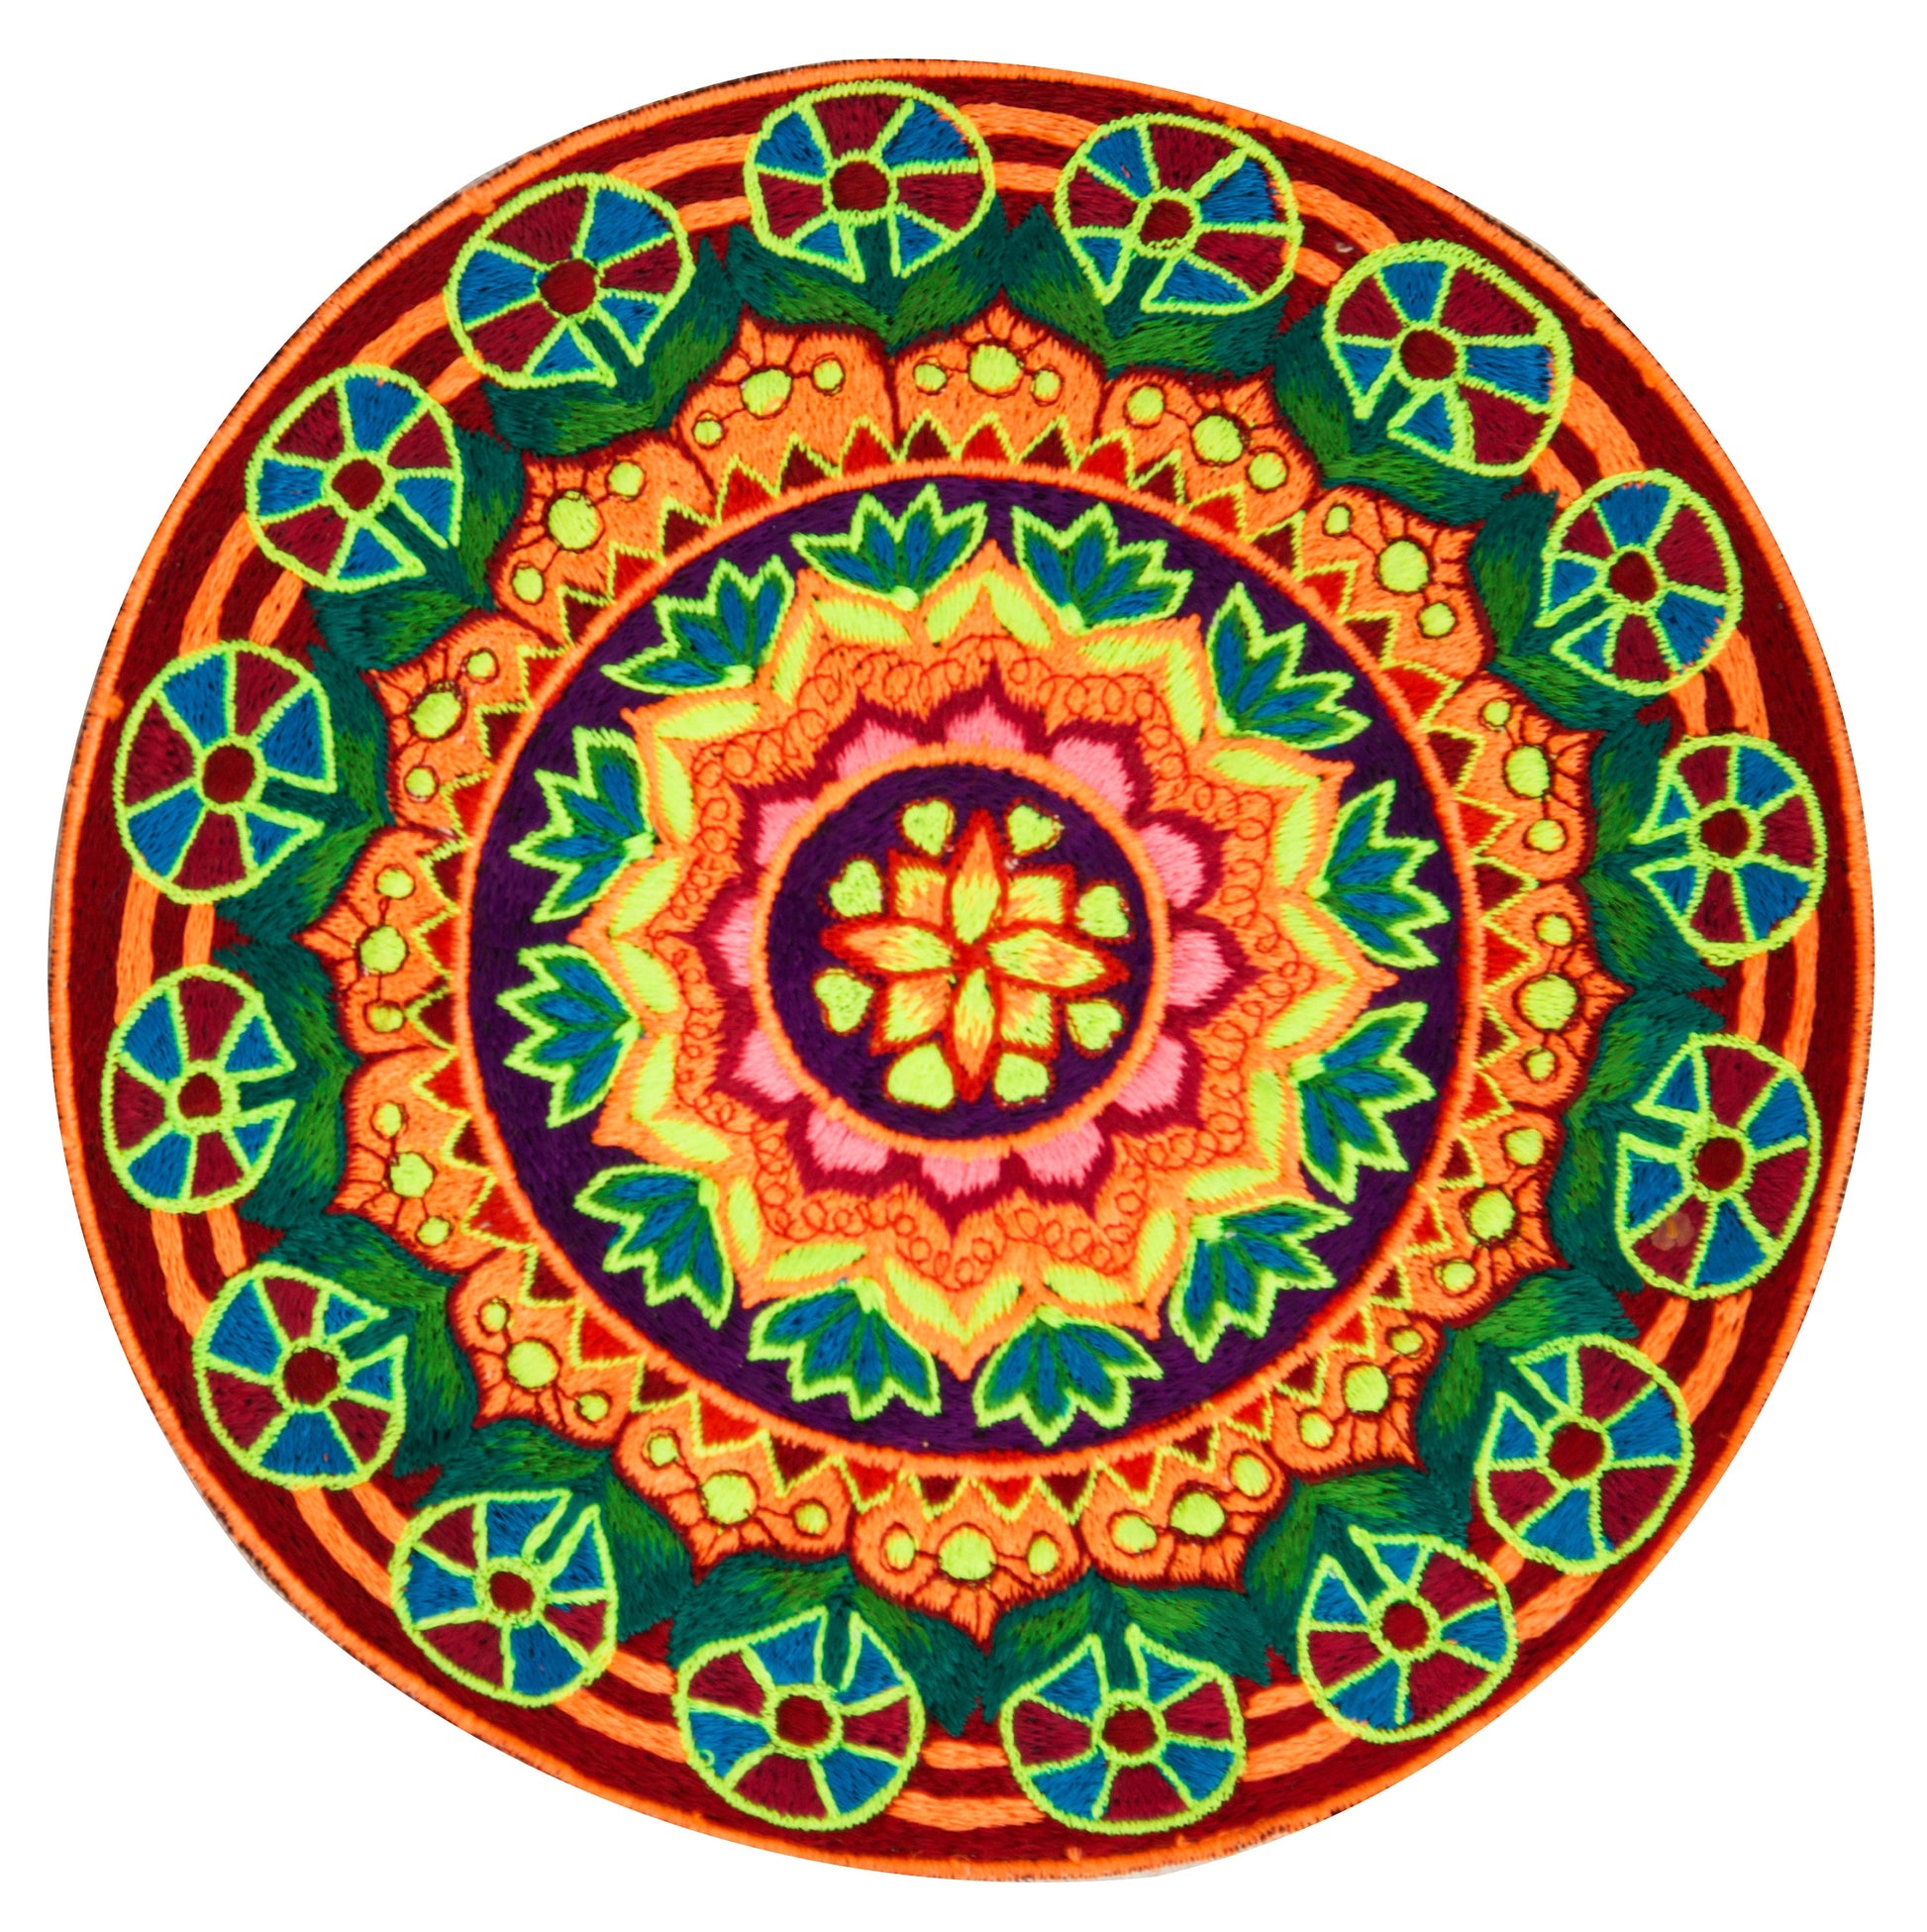 Psychedelic Sun mandala embroidery patch artwork blacklight glowing high detail beautiful colors